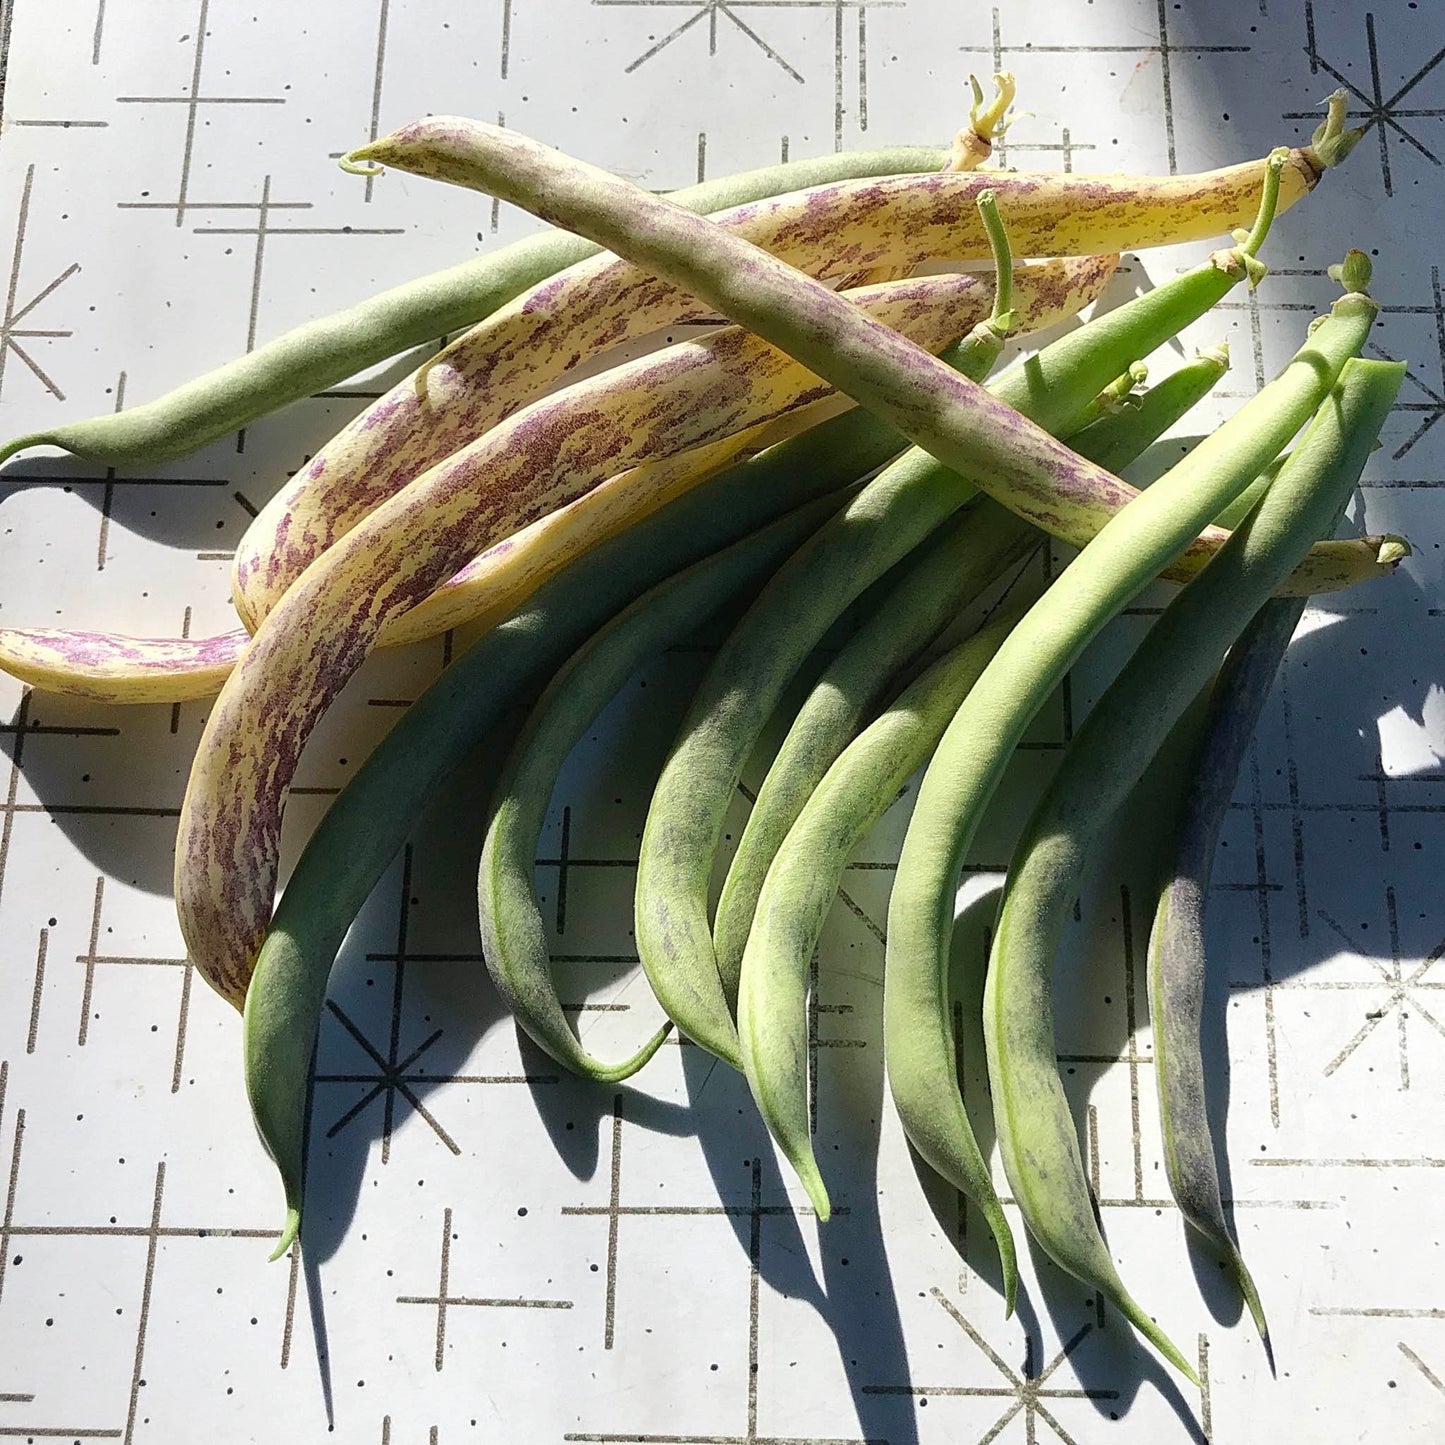 Green and yellow snap bean pods with purple speckles on a table.